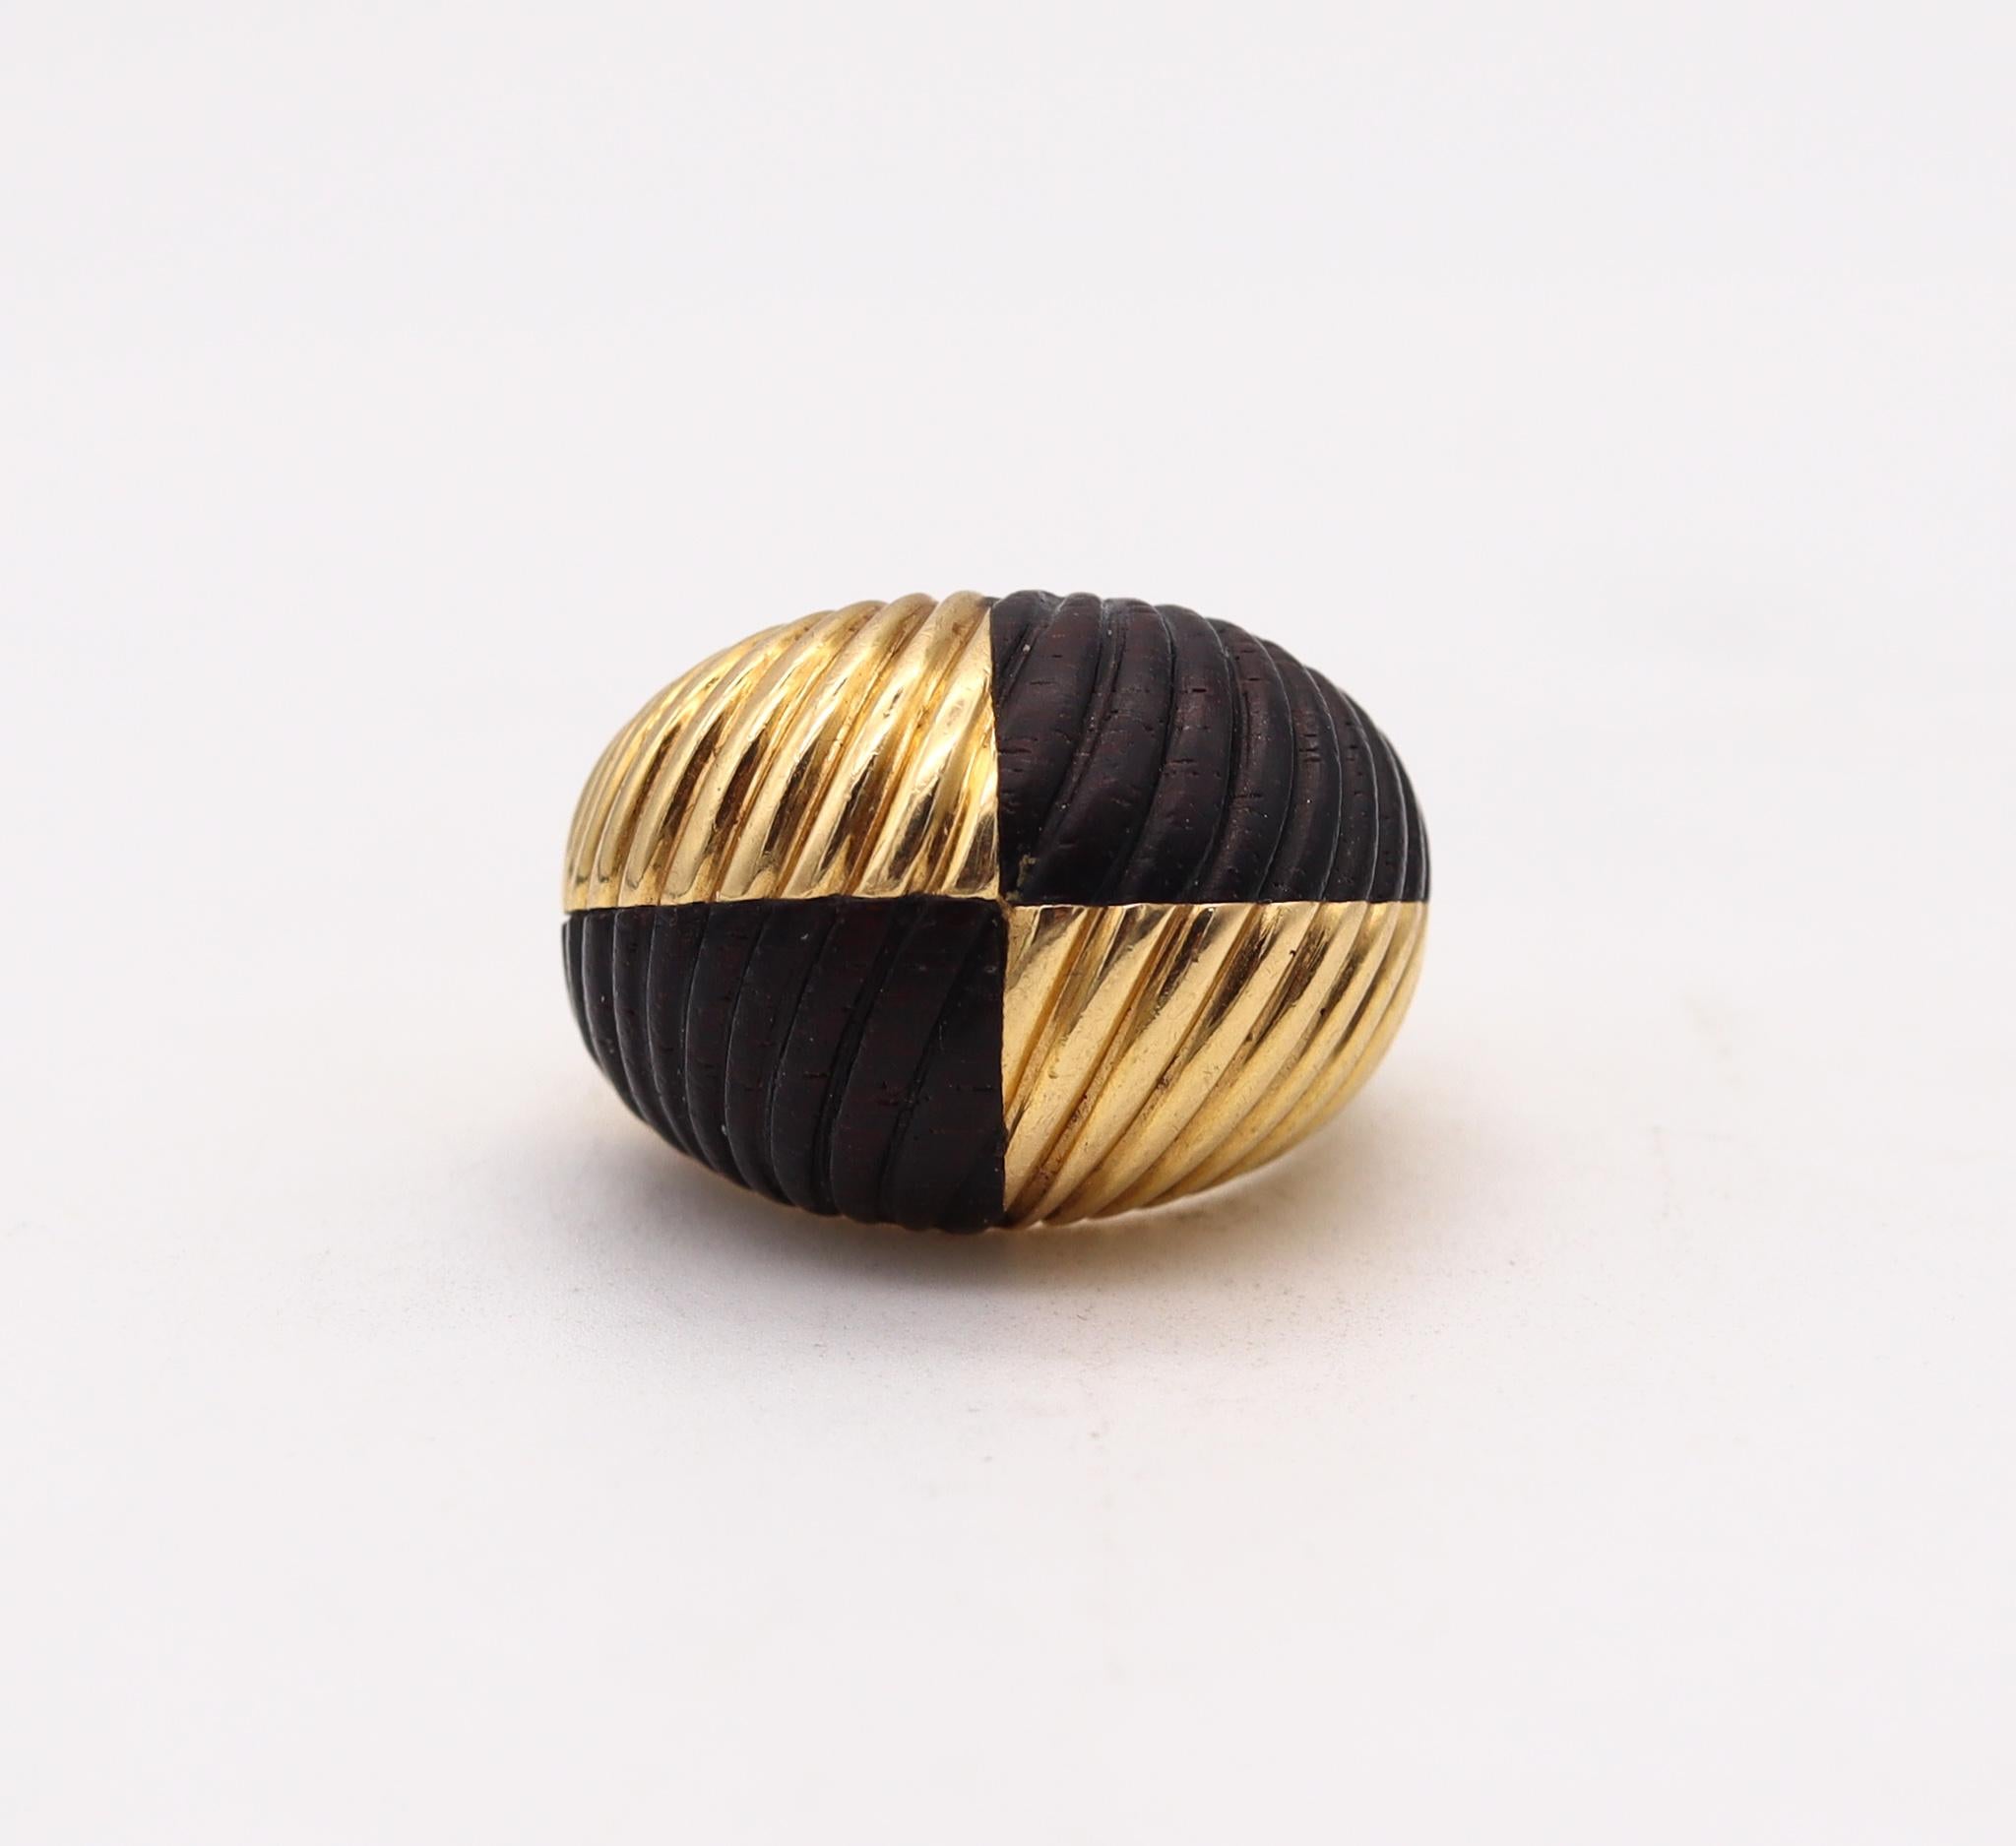 Modernist Van Cleef & Arpels 1970 Paris Bombe Wood Cocktail Ring in 18Kt Yellow Gold